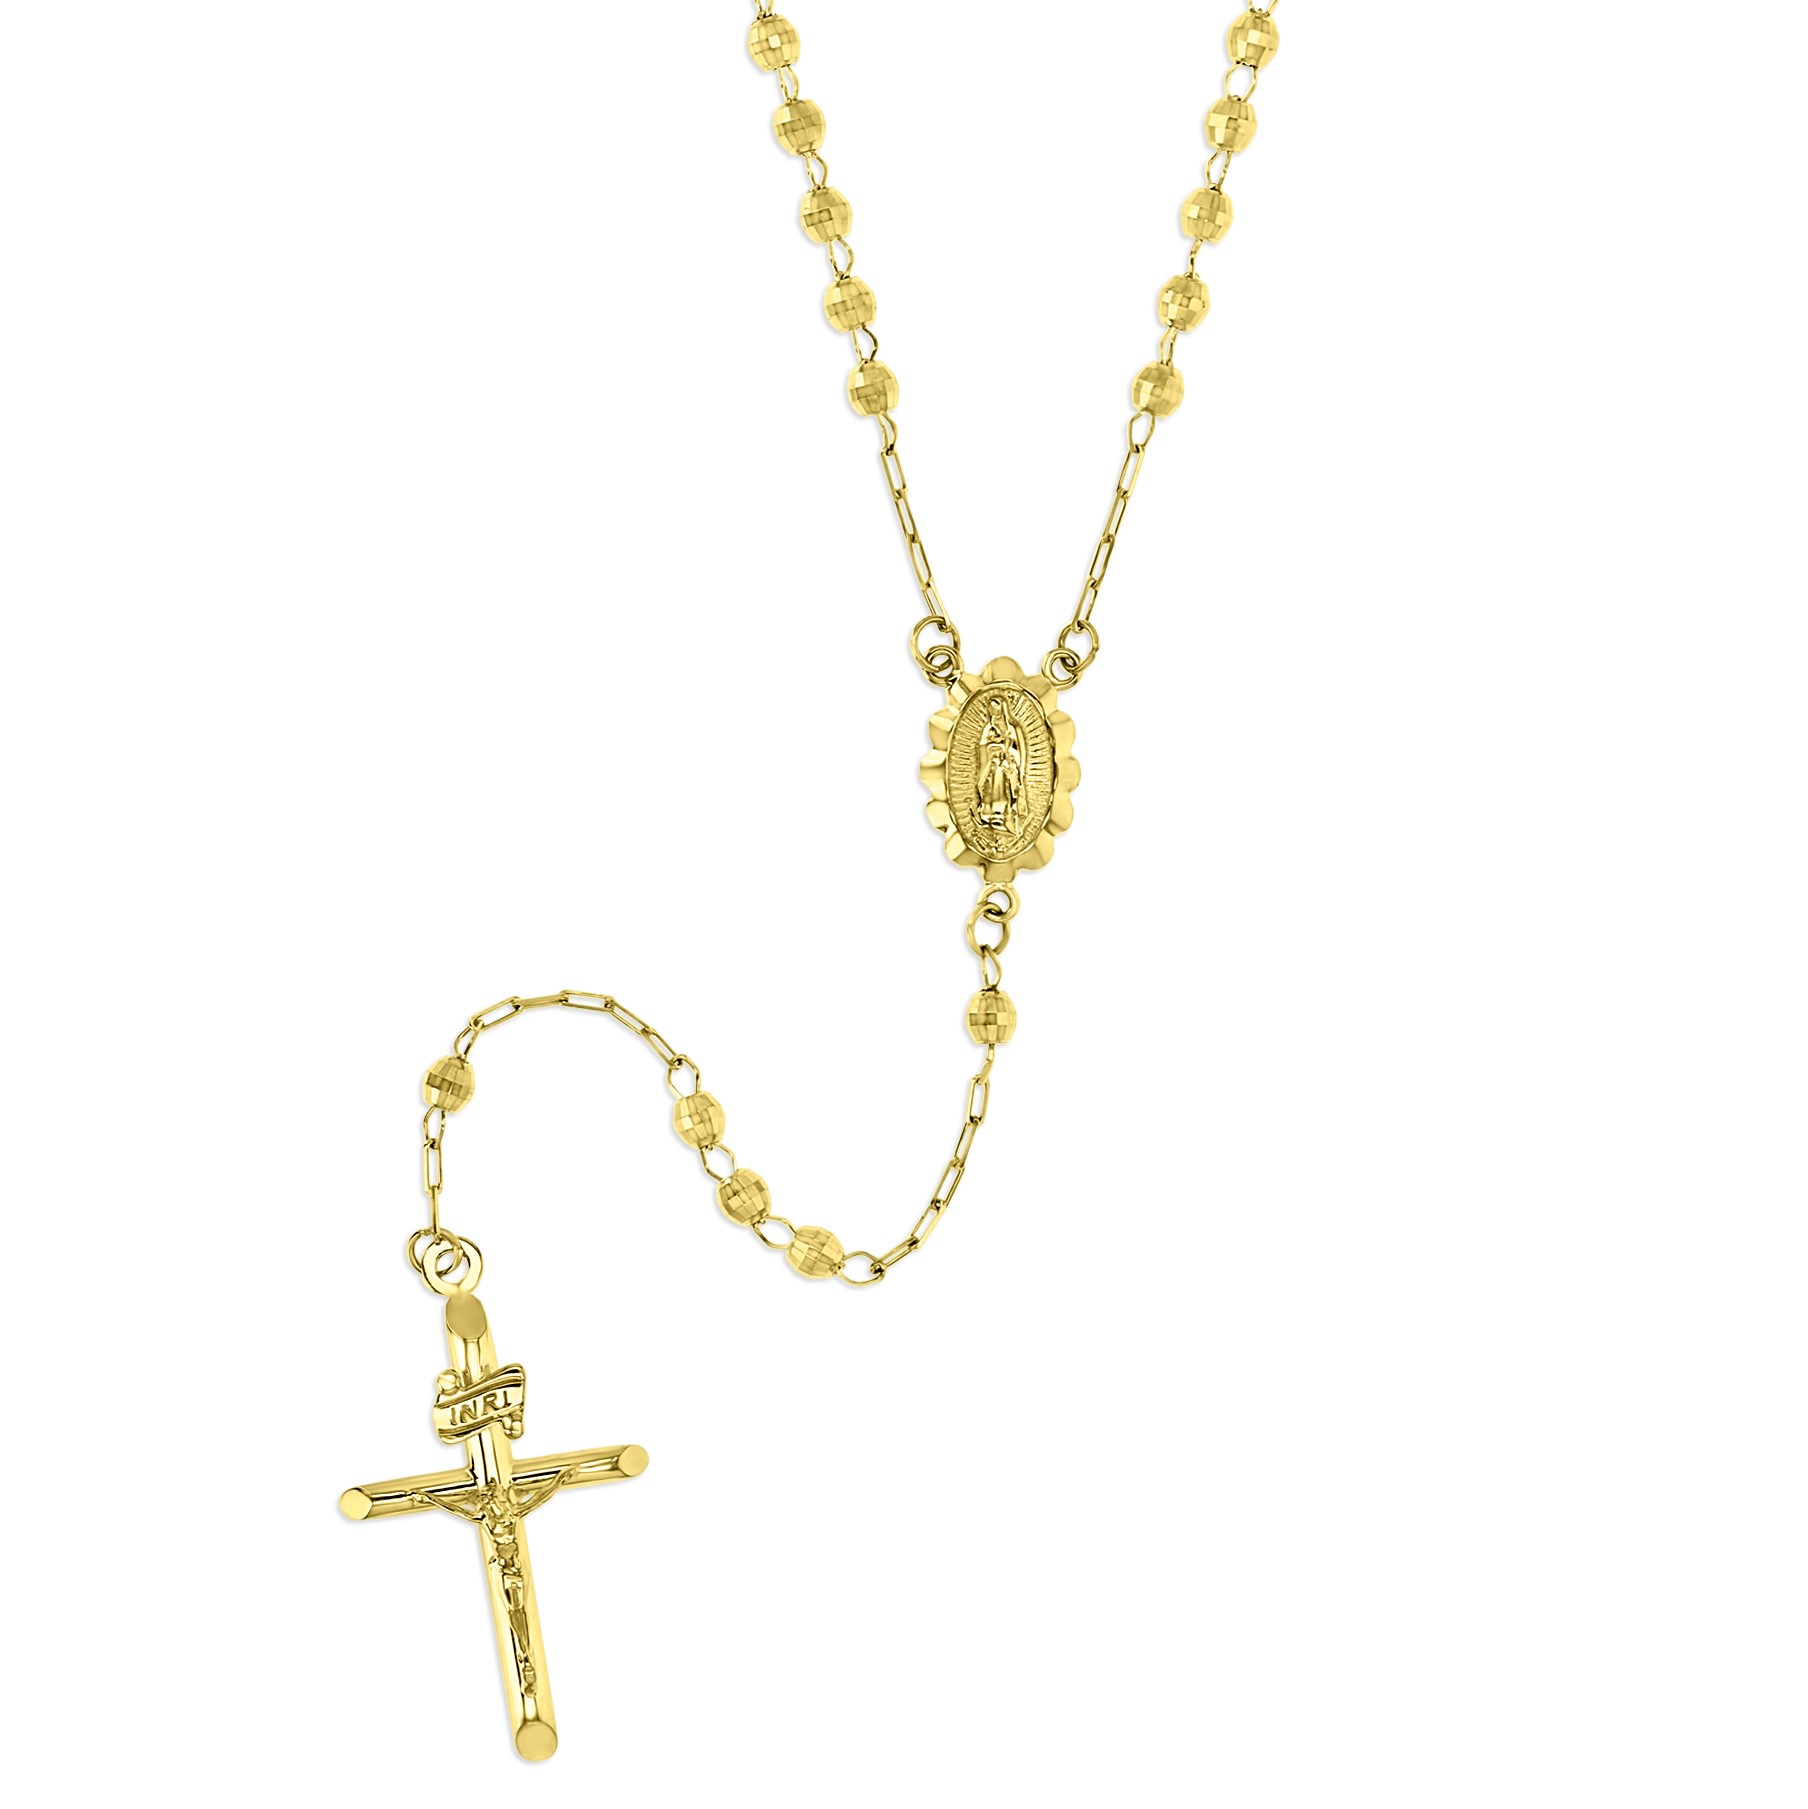 14K Yellow Gold 3MM Diamond Cut Beads Rosary 24" Necklace